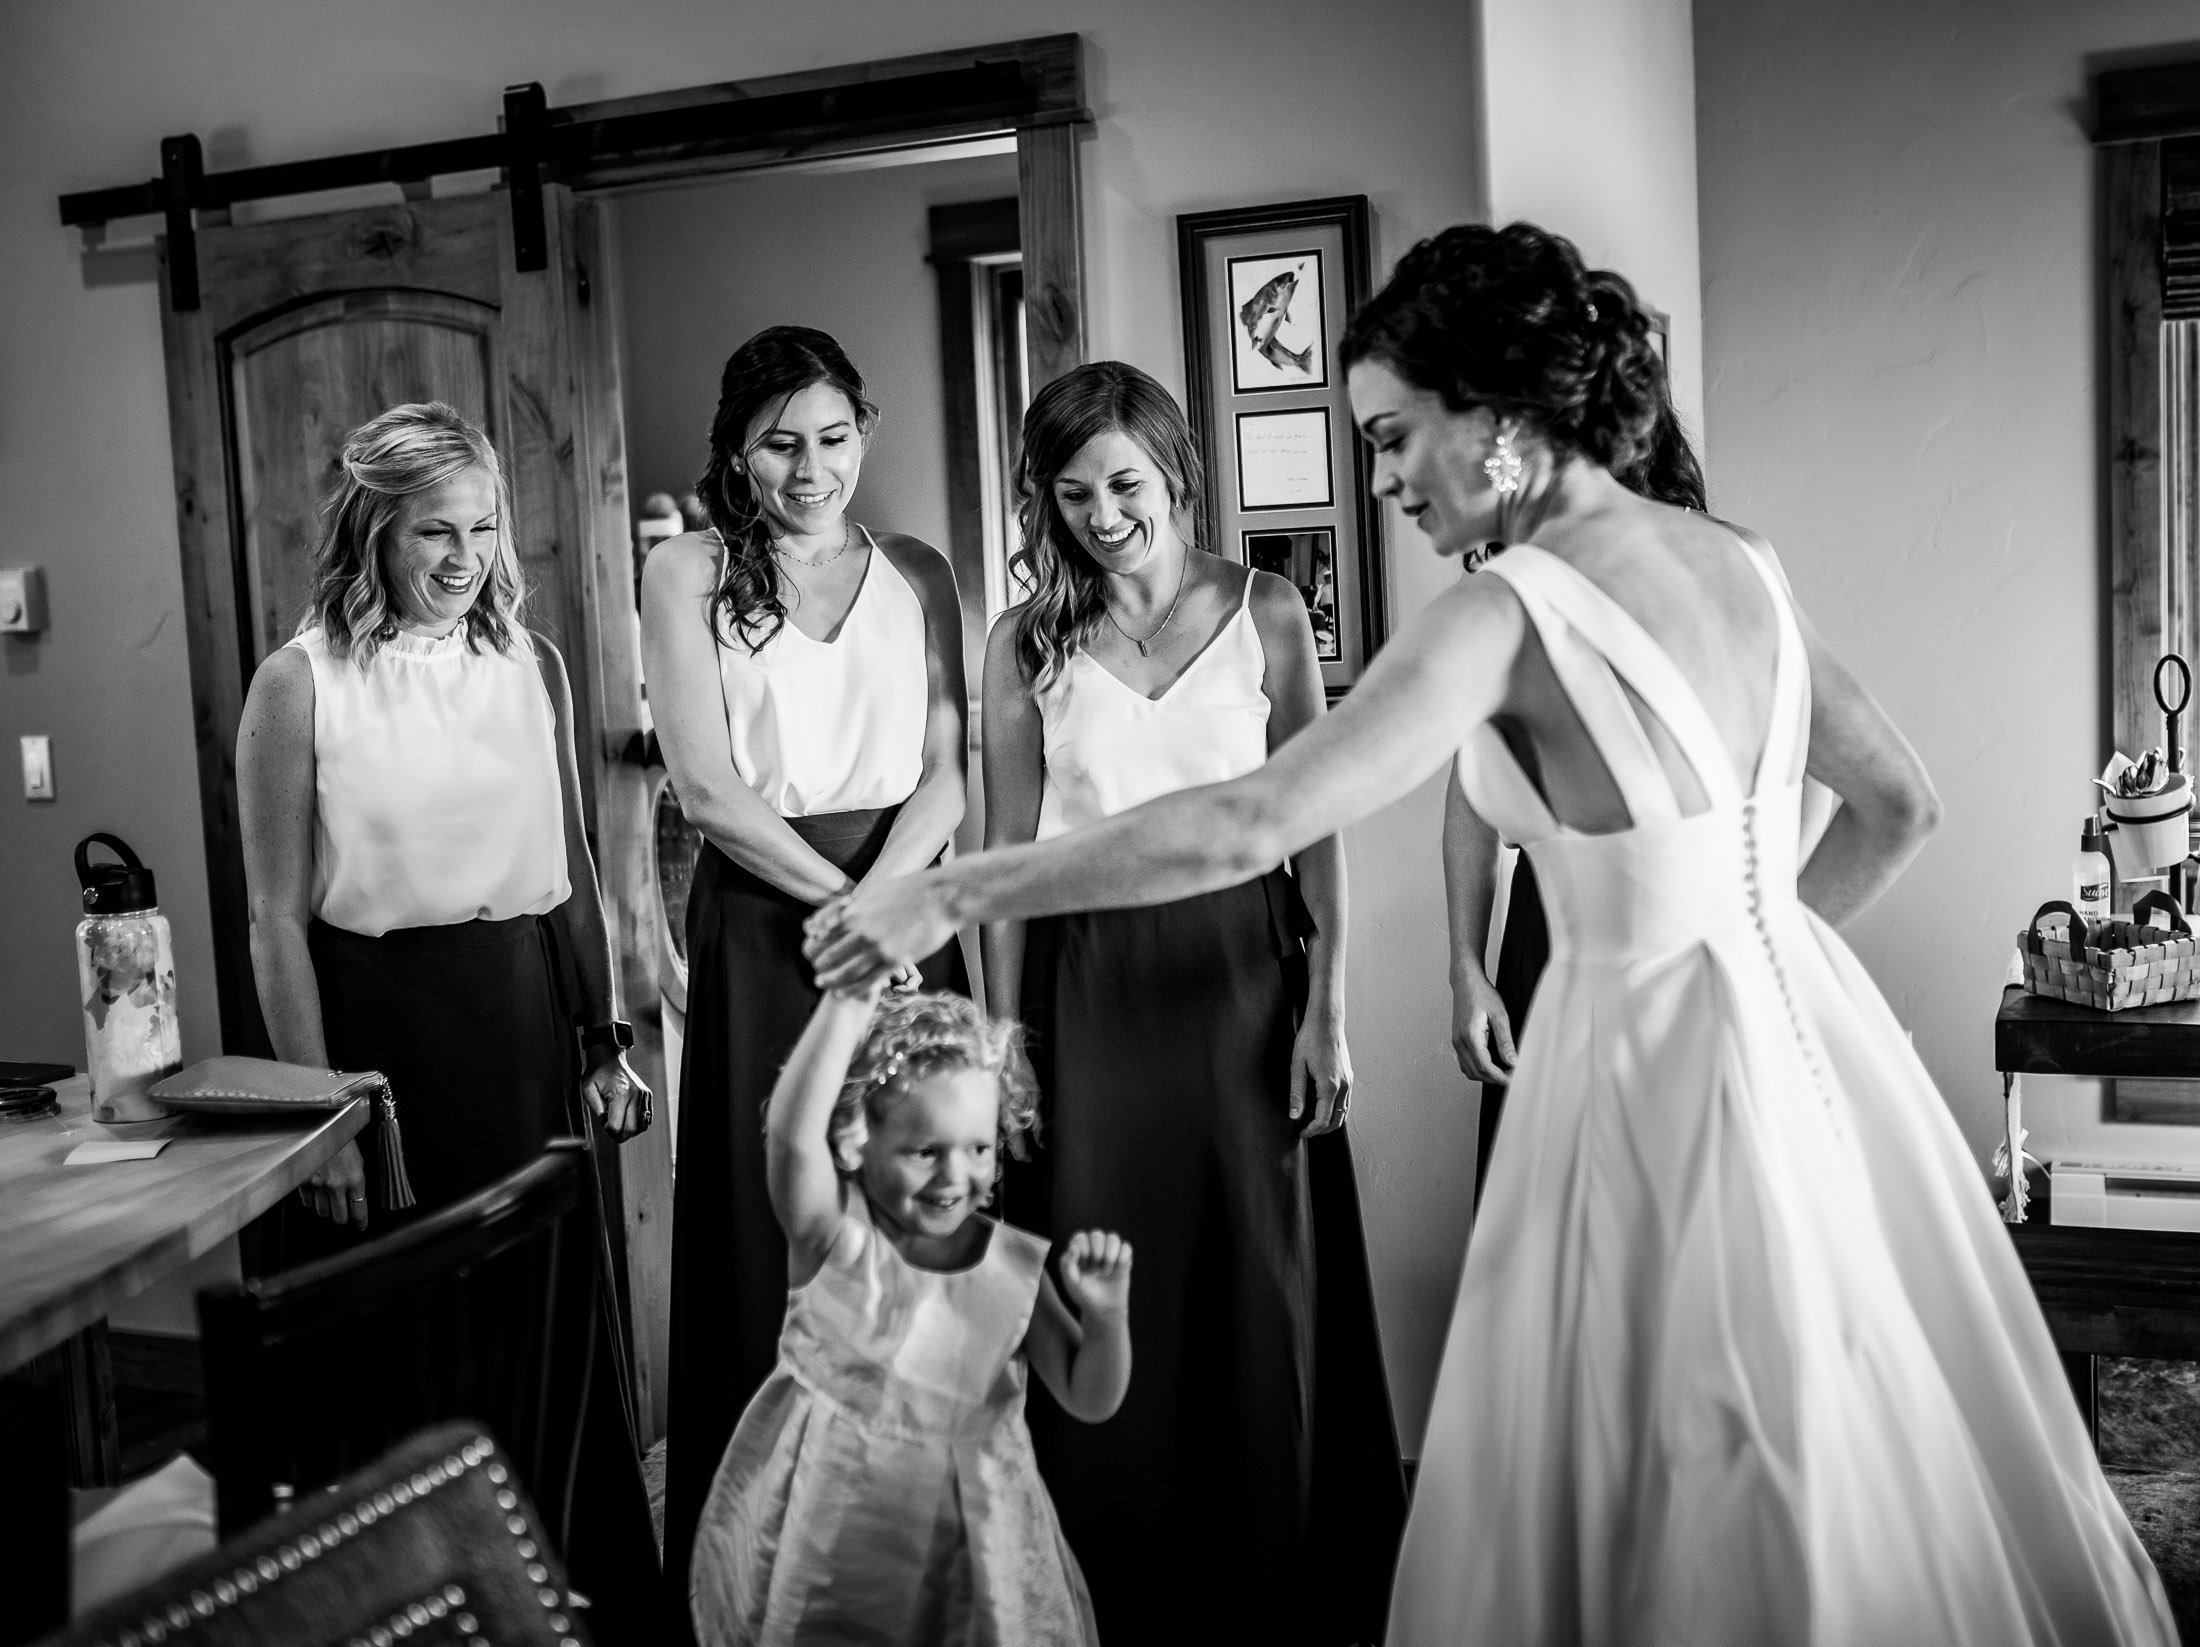 Bride gets into her wedding gown as she plays with her niece at her family's home in the mountains, wedding, wedding photos, wedding photography, wedding photographer, wedding inspiration, wedding photo inspiration, wedding portraits, wedding ceremony, wedding reception, mountain wedding, Catholic Church wedding, Catholic Church wedding photos, Catholic Church wedding photography, Catholic Church wedding photographer, Catholic Church wedding inspiration, Catholic Church wedding venue, Steamboat Springs wedding, Steamboat Springs wedding photos, Steamboat Springs wedding photography, Steamboat Springs wedding photographer, Colorado wedding, Colorado wedding photos, Colorado wedding photography, Colorado wedding photographer, Colorado mountain wedding, Colorado wedding inspiration